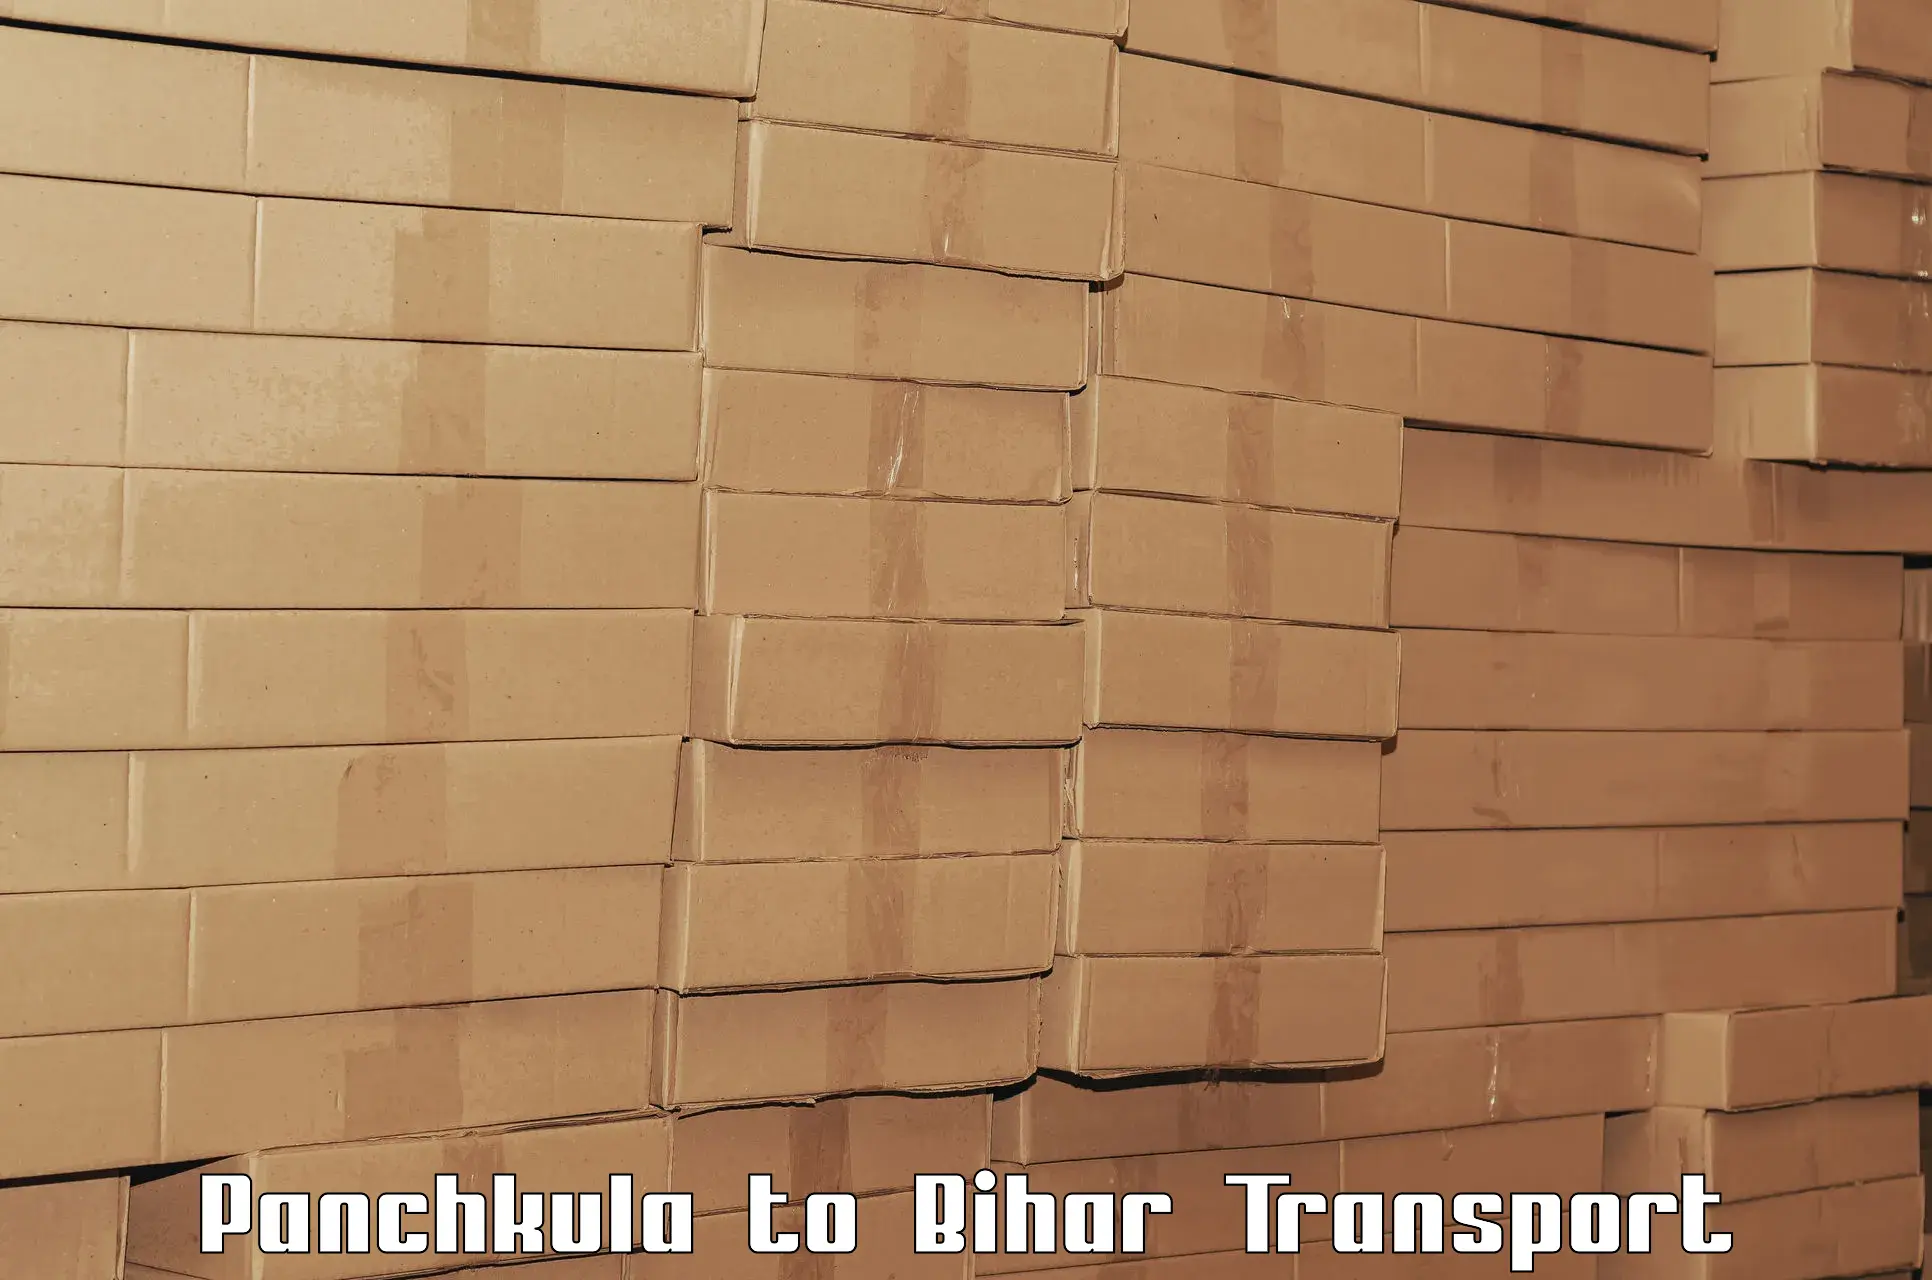 Transport shared services Panchkula to Ghogha